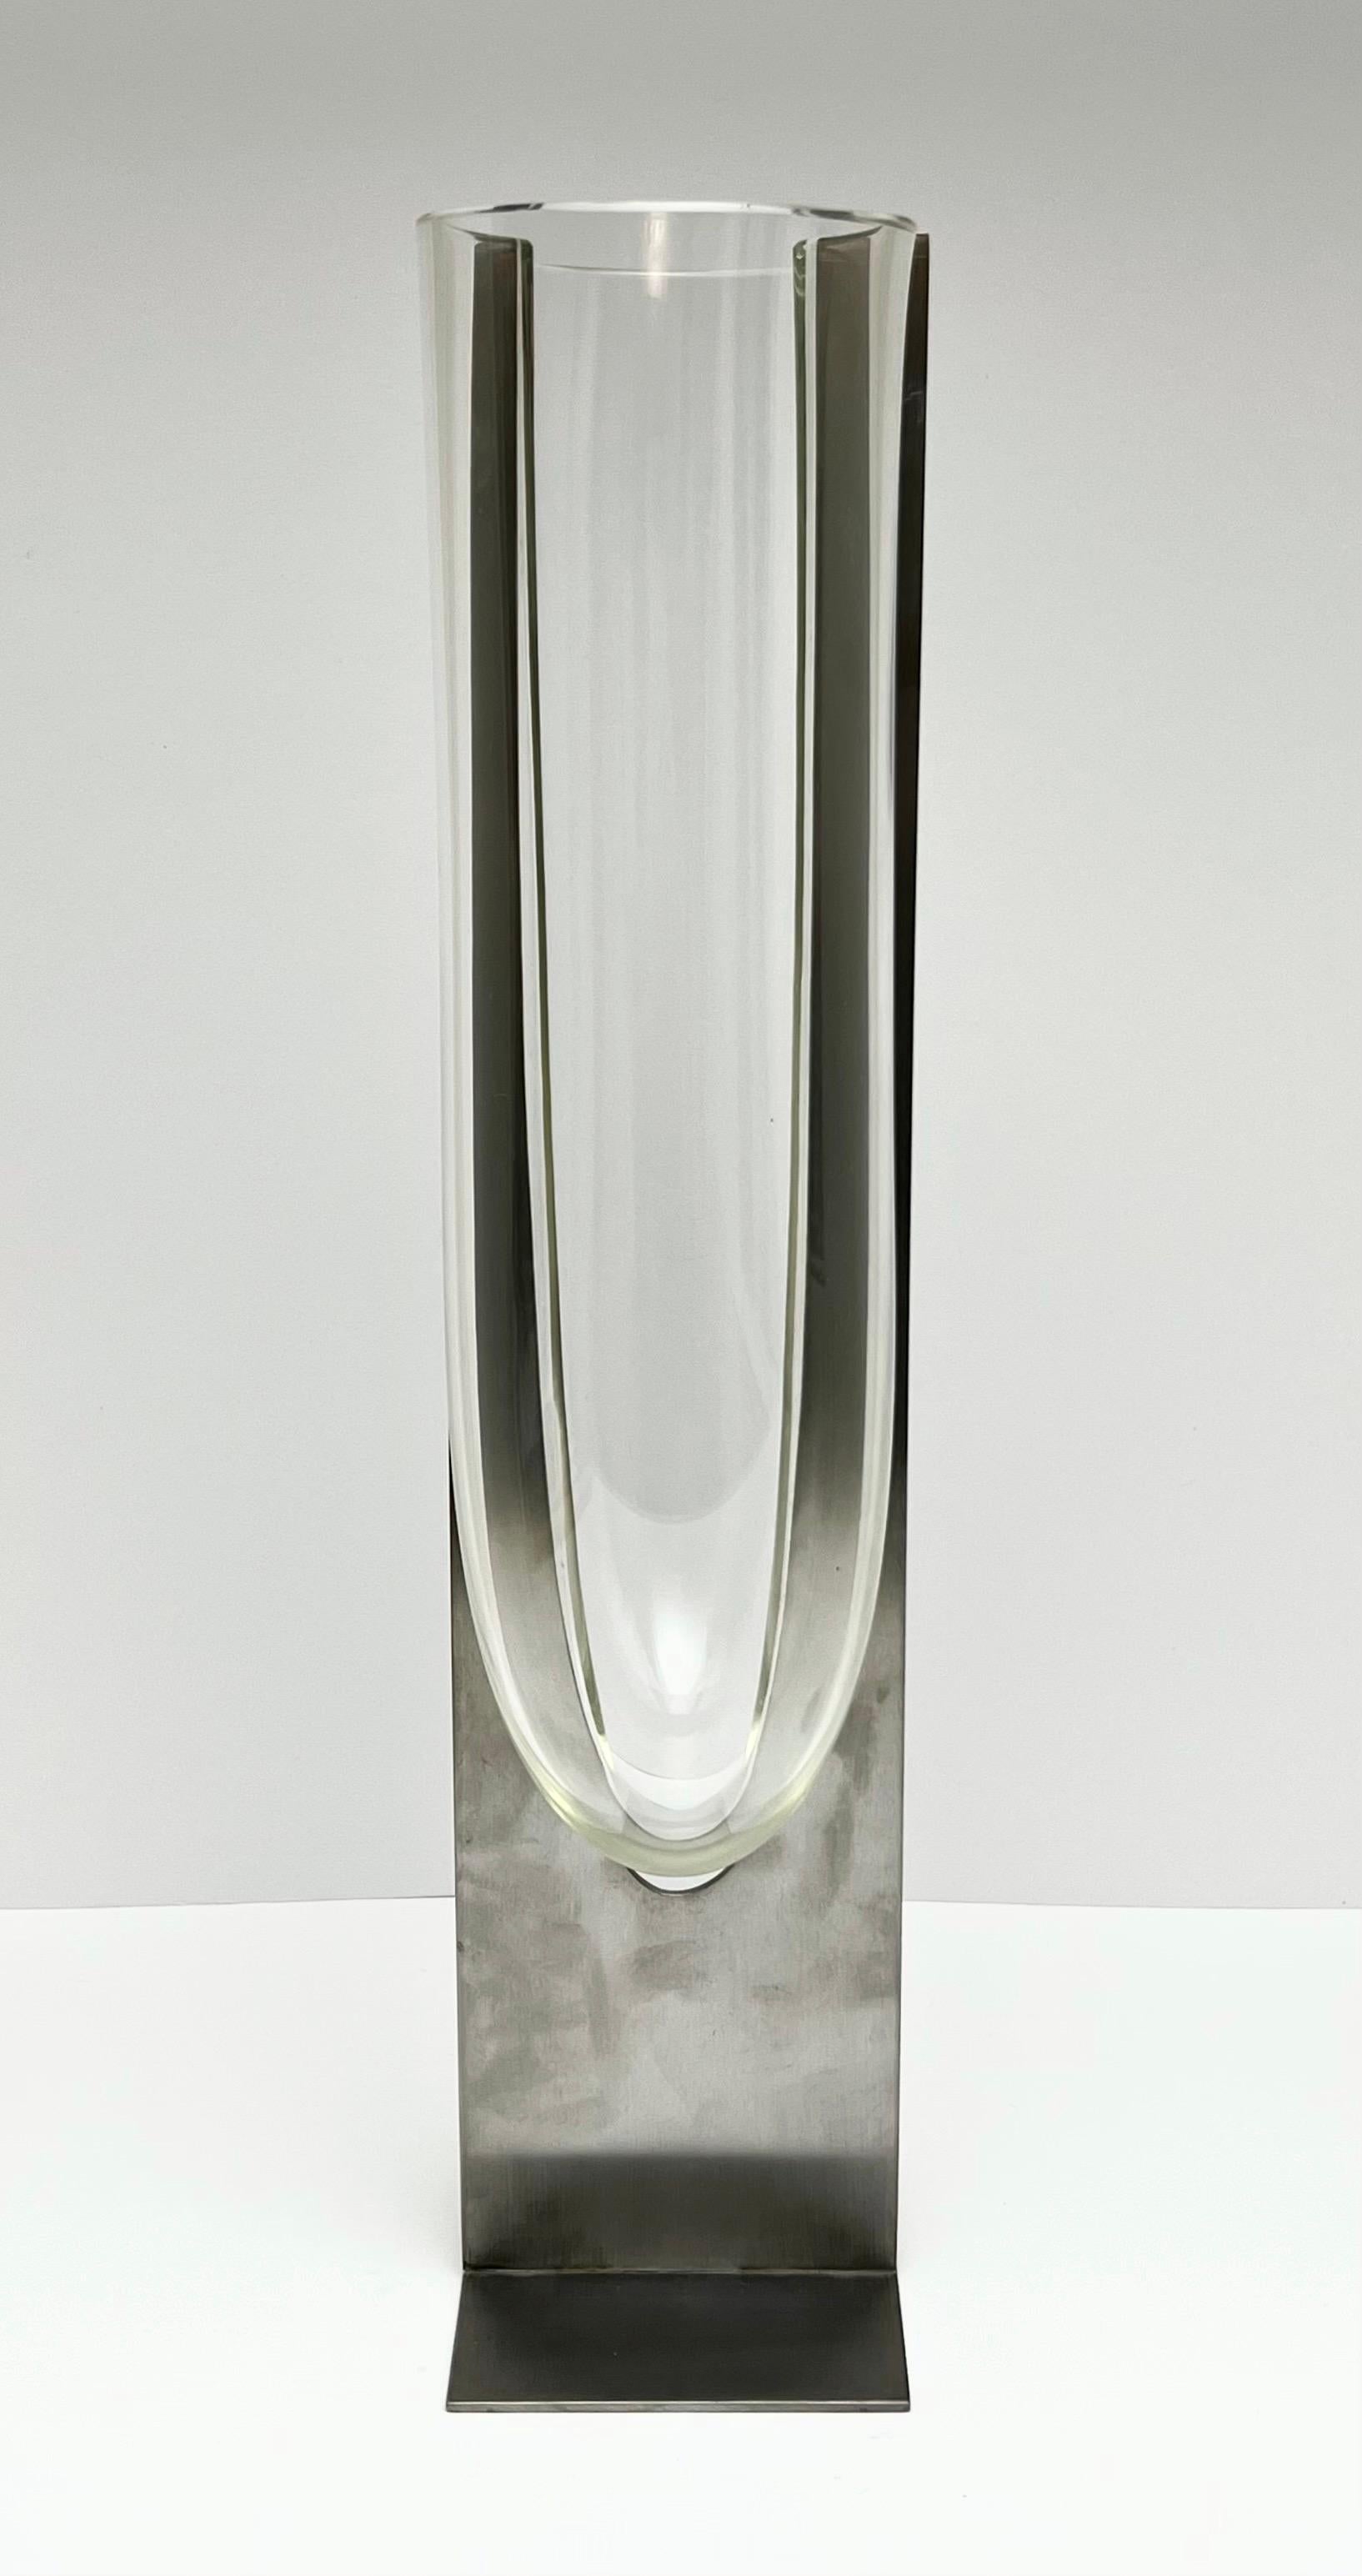 Stainless Steel Carlo Nason Glass and Steel Vase by Mazzega